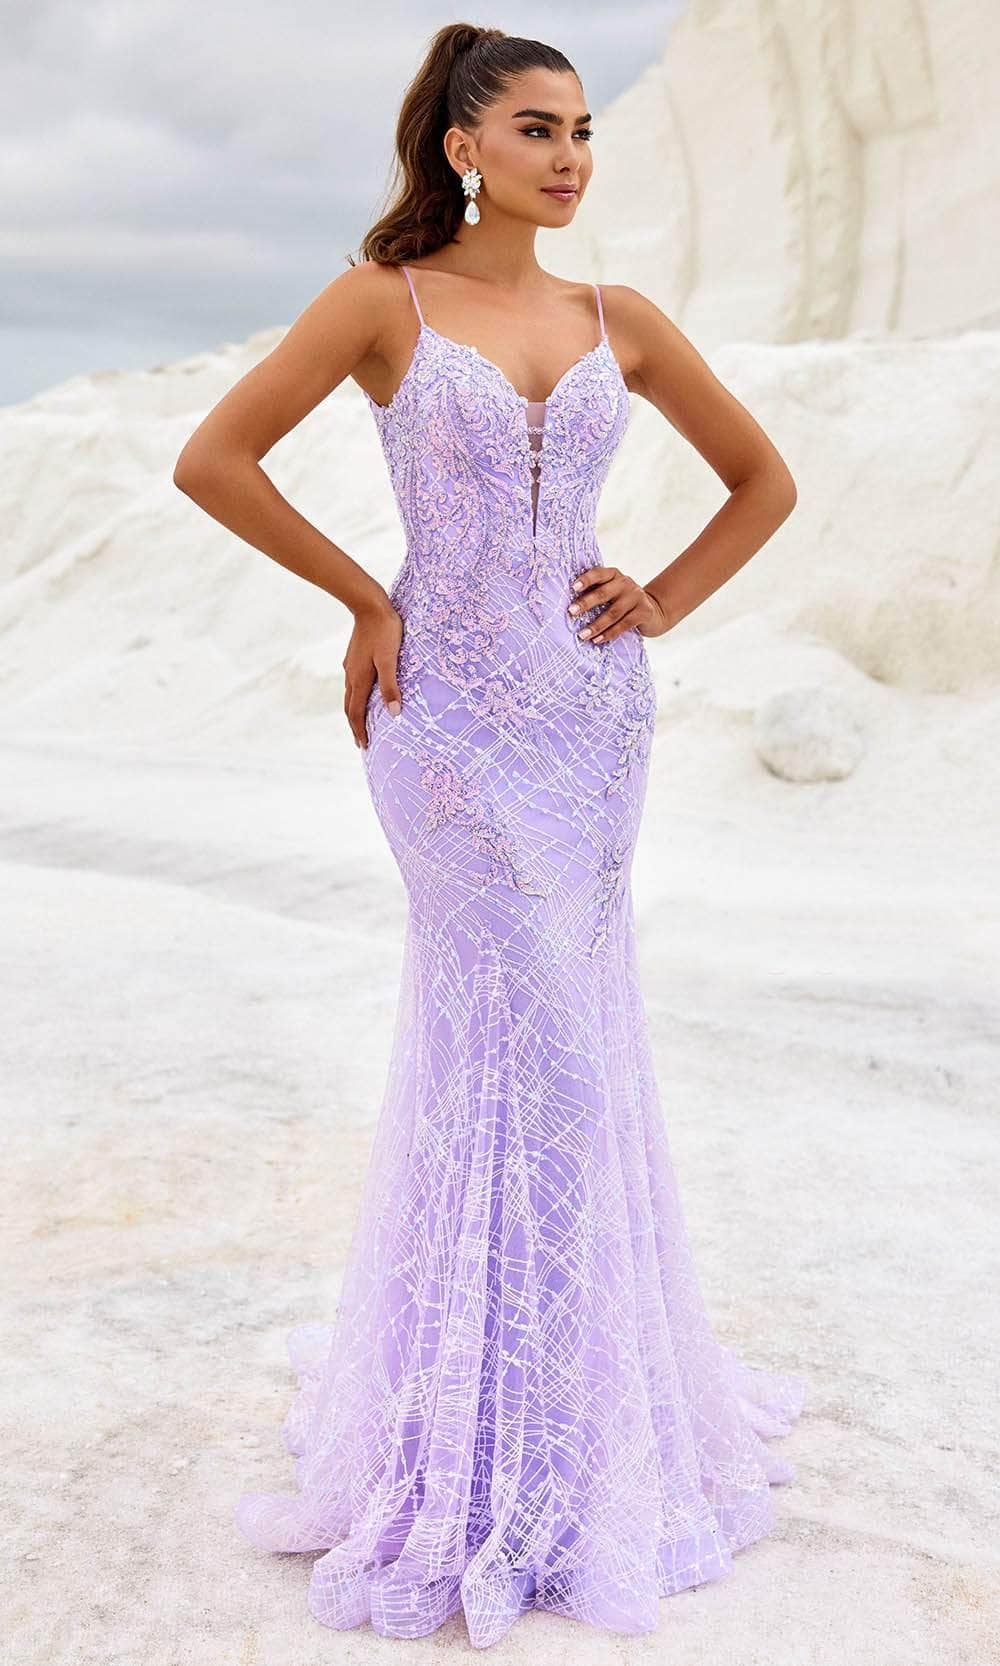 Image of Blush by Alexia Designs 12175 - Embroidered Plunging V-Neck Prom Gown